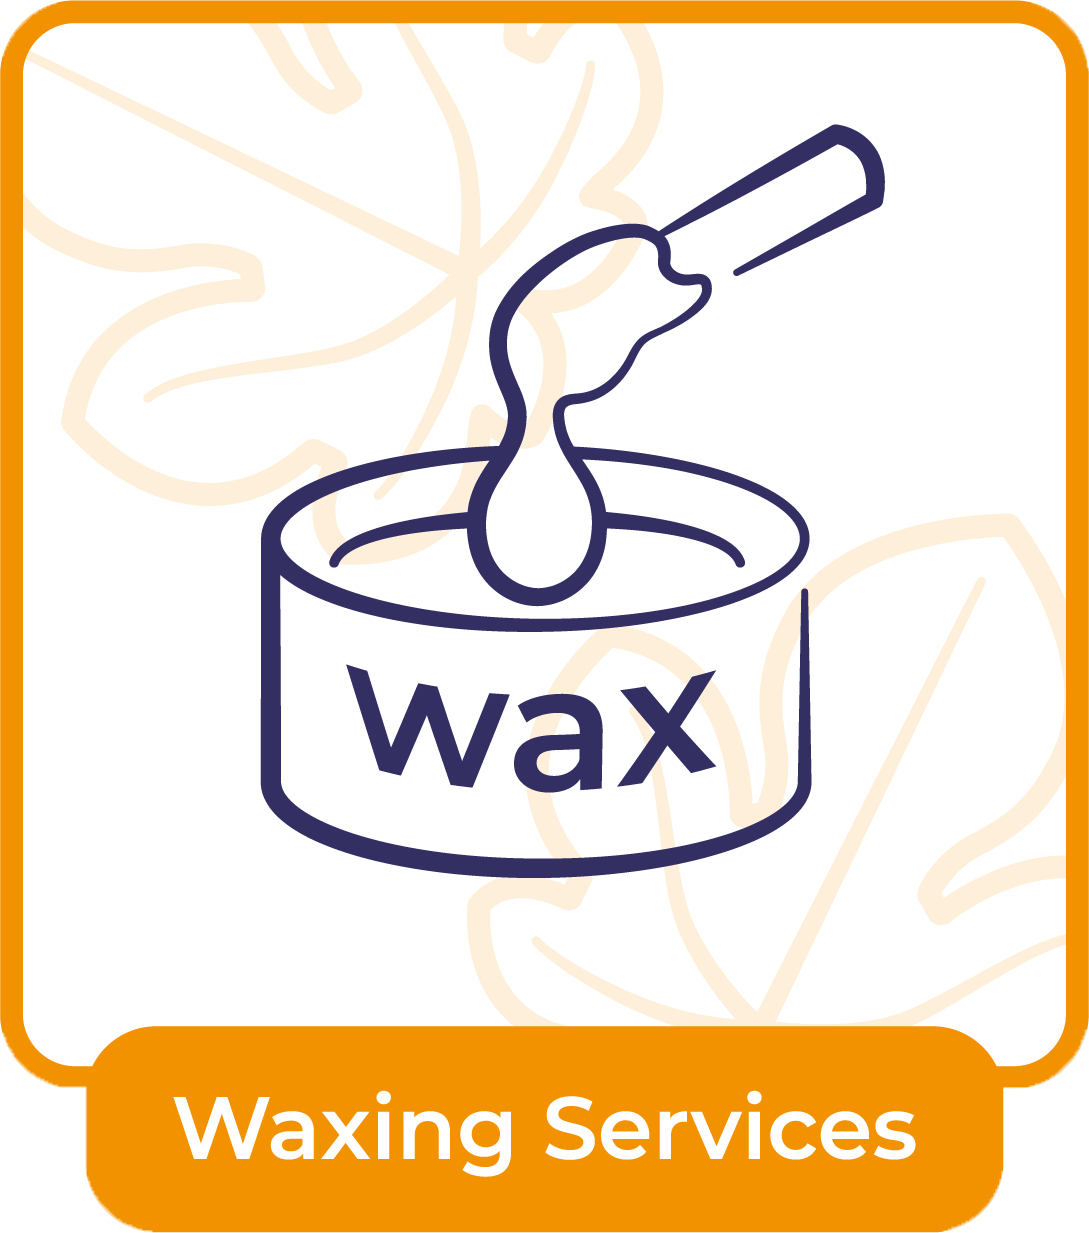 Waxing Services